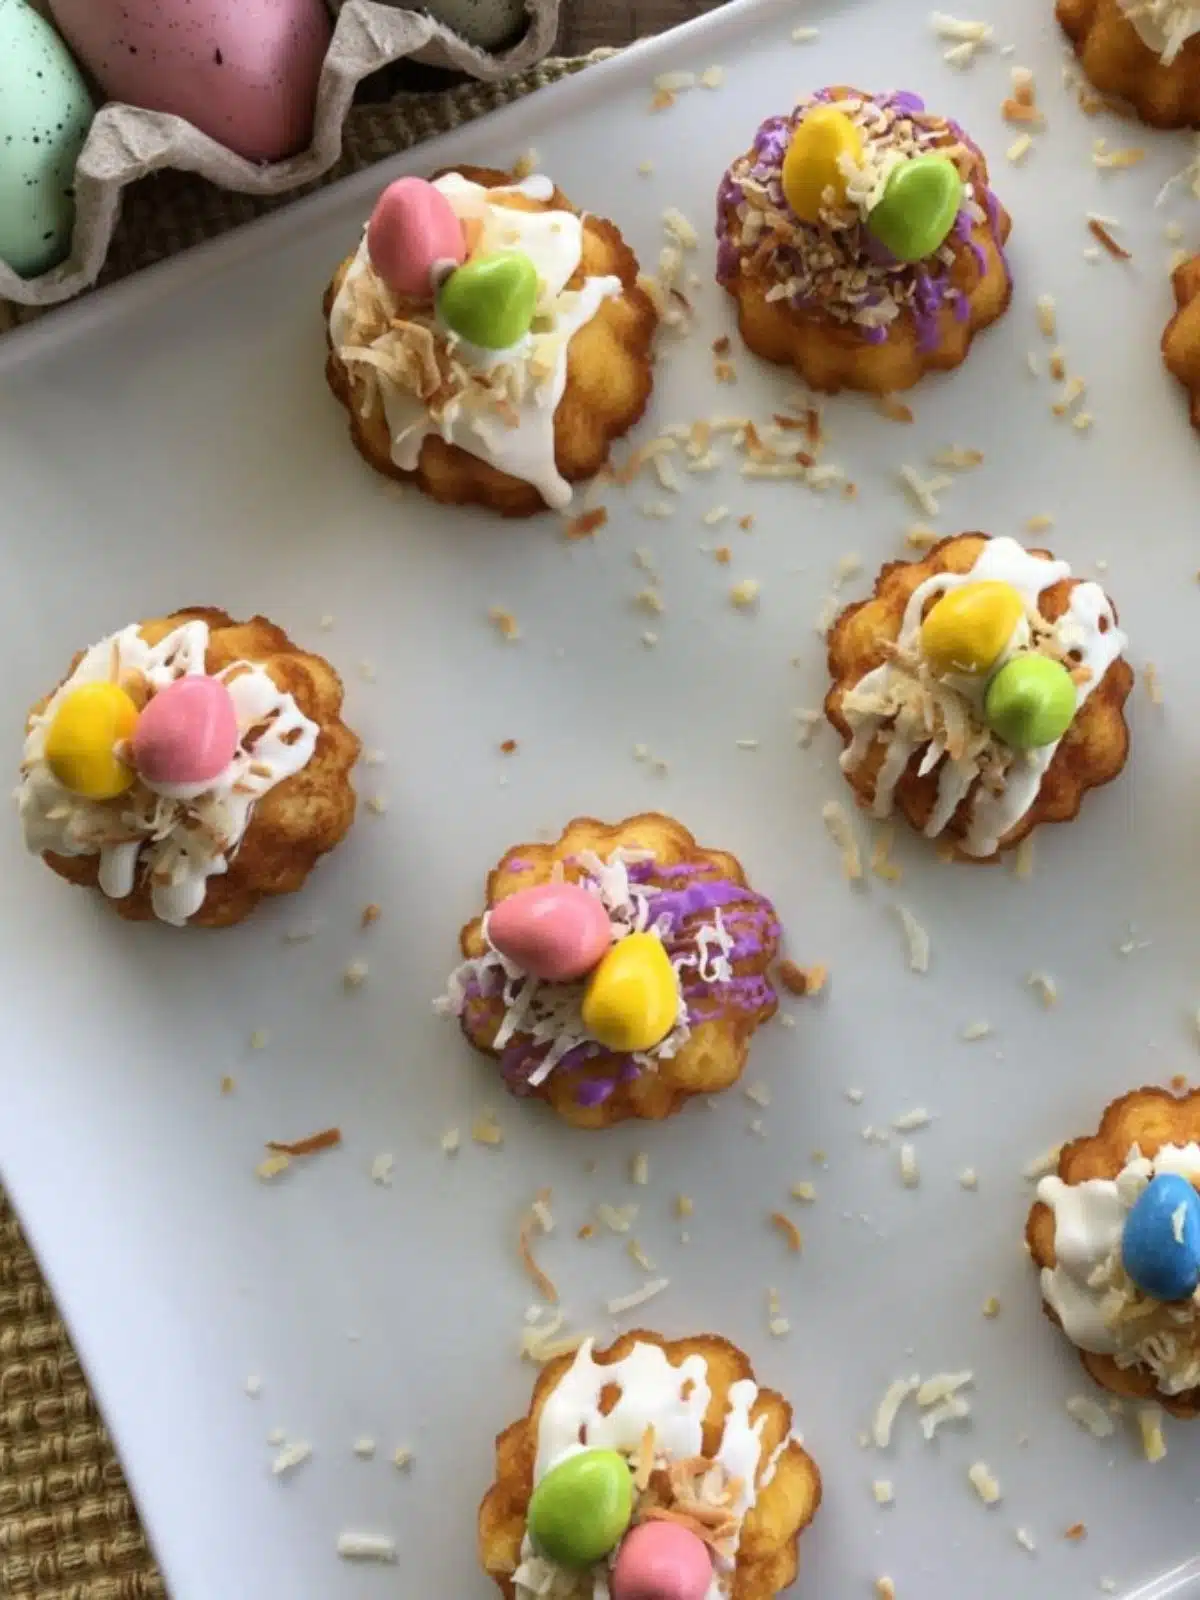 Vanilla mini bundt cakes with coconut, icing and candies on white plate.